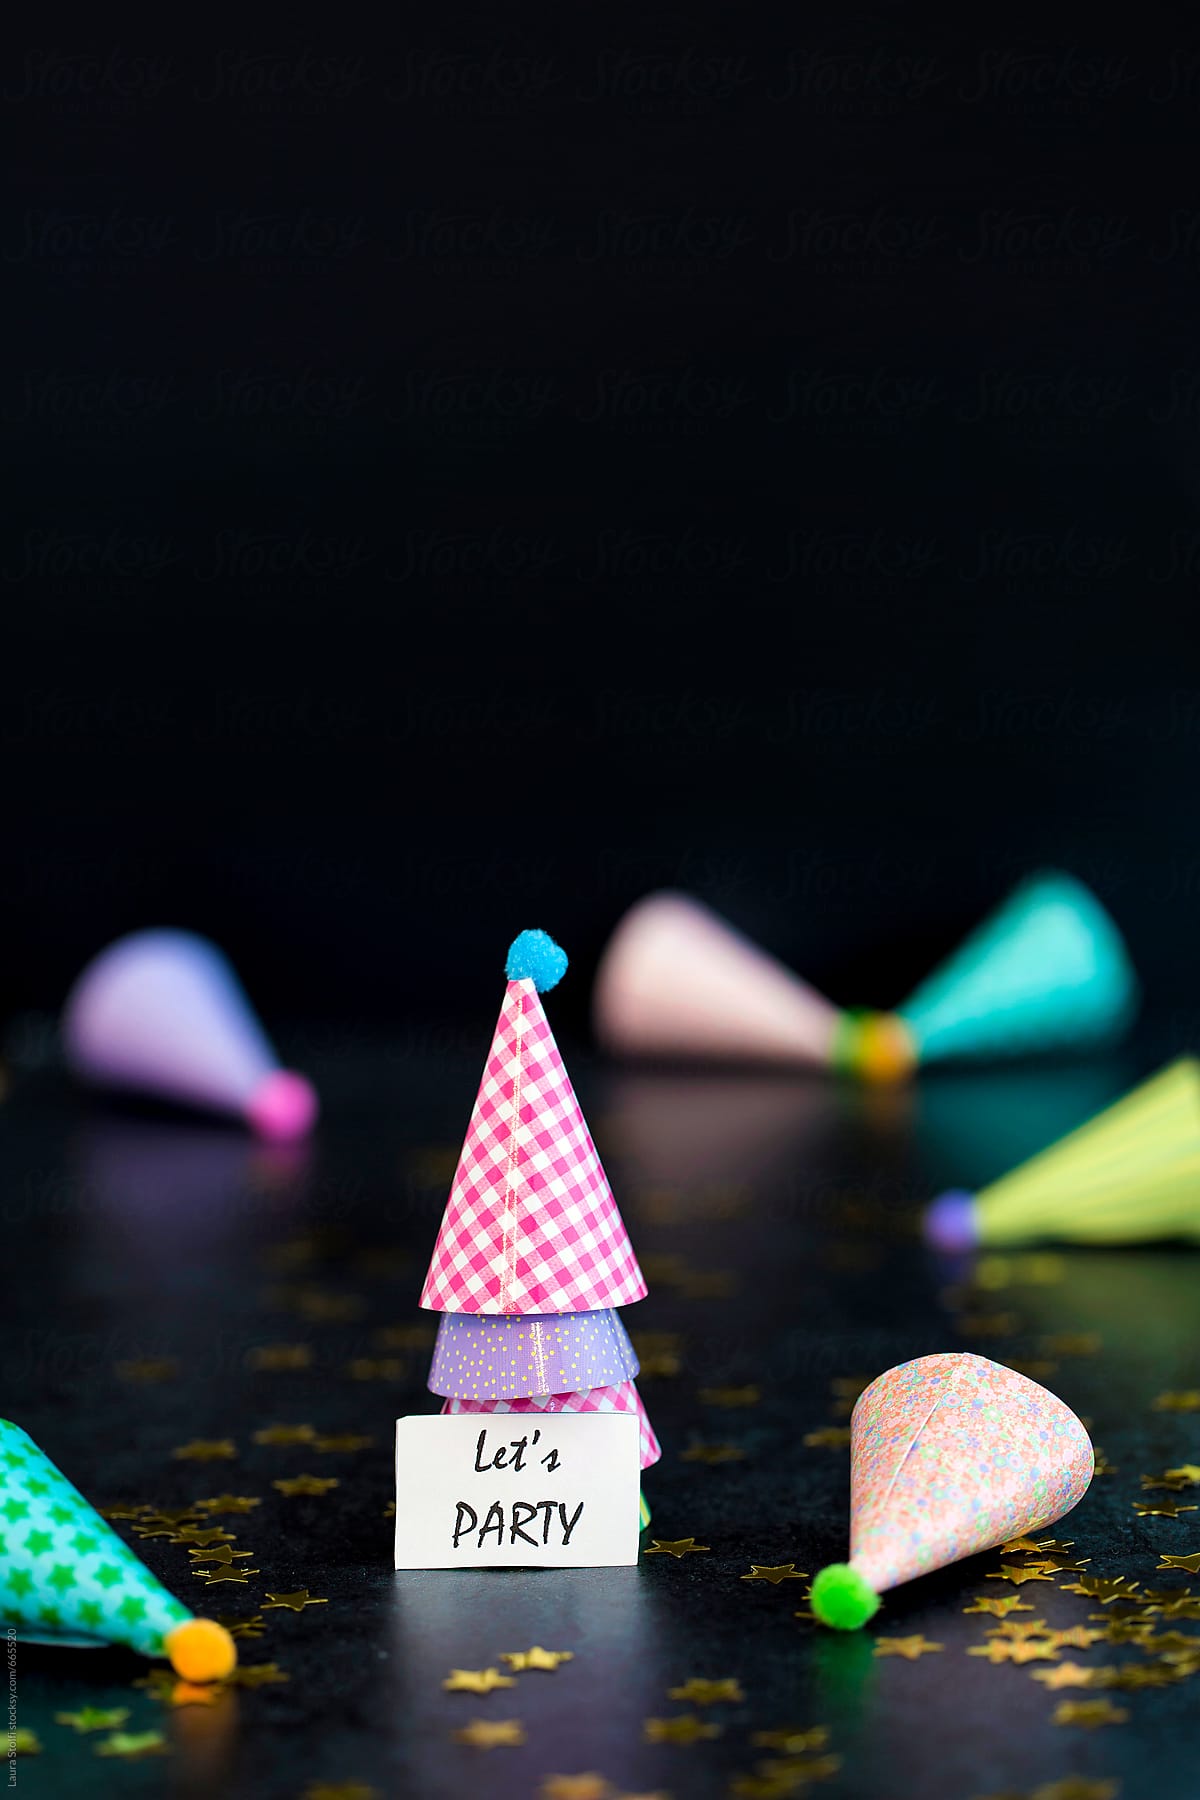 Let\'s party message in front of multi colored party hats